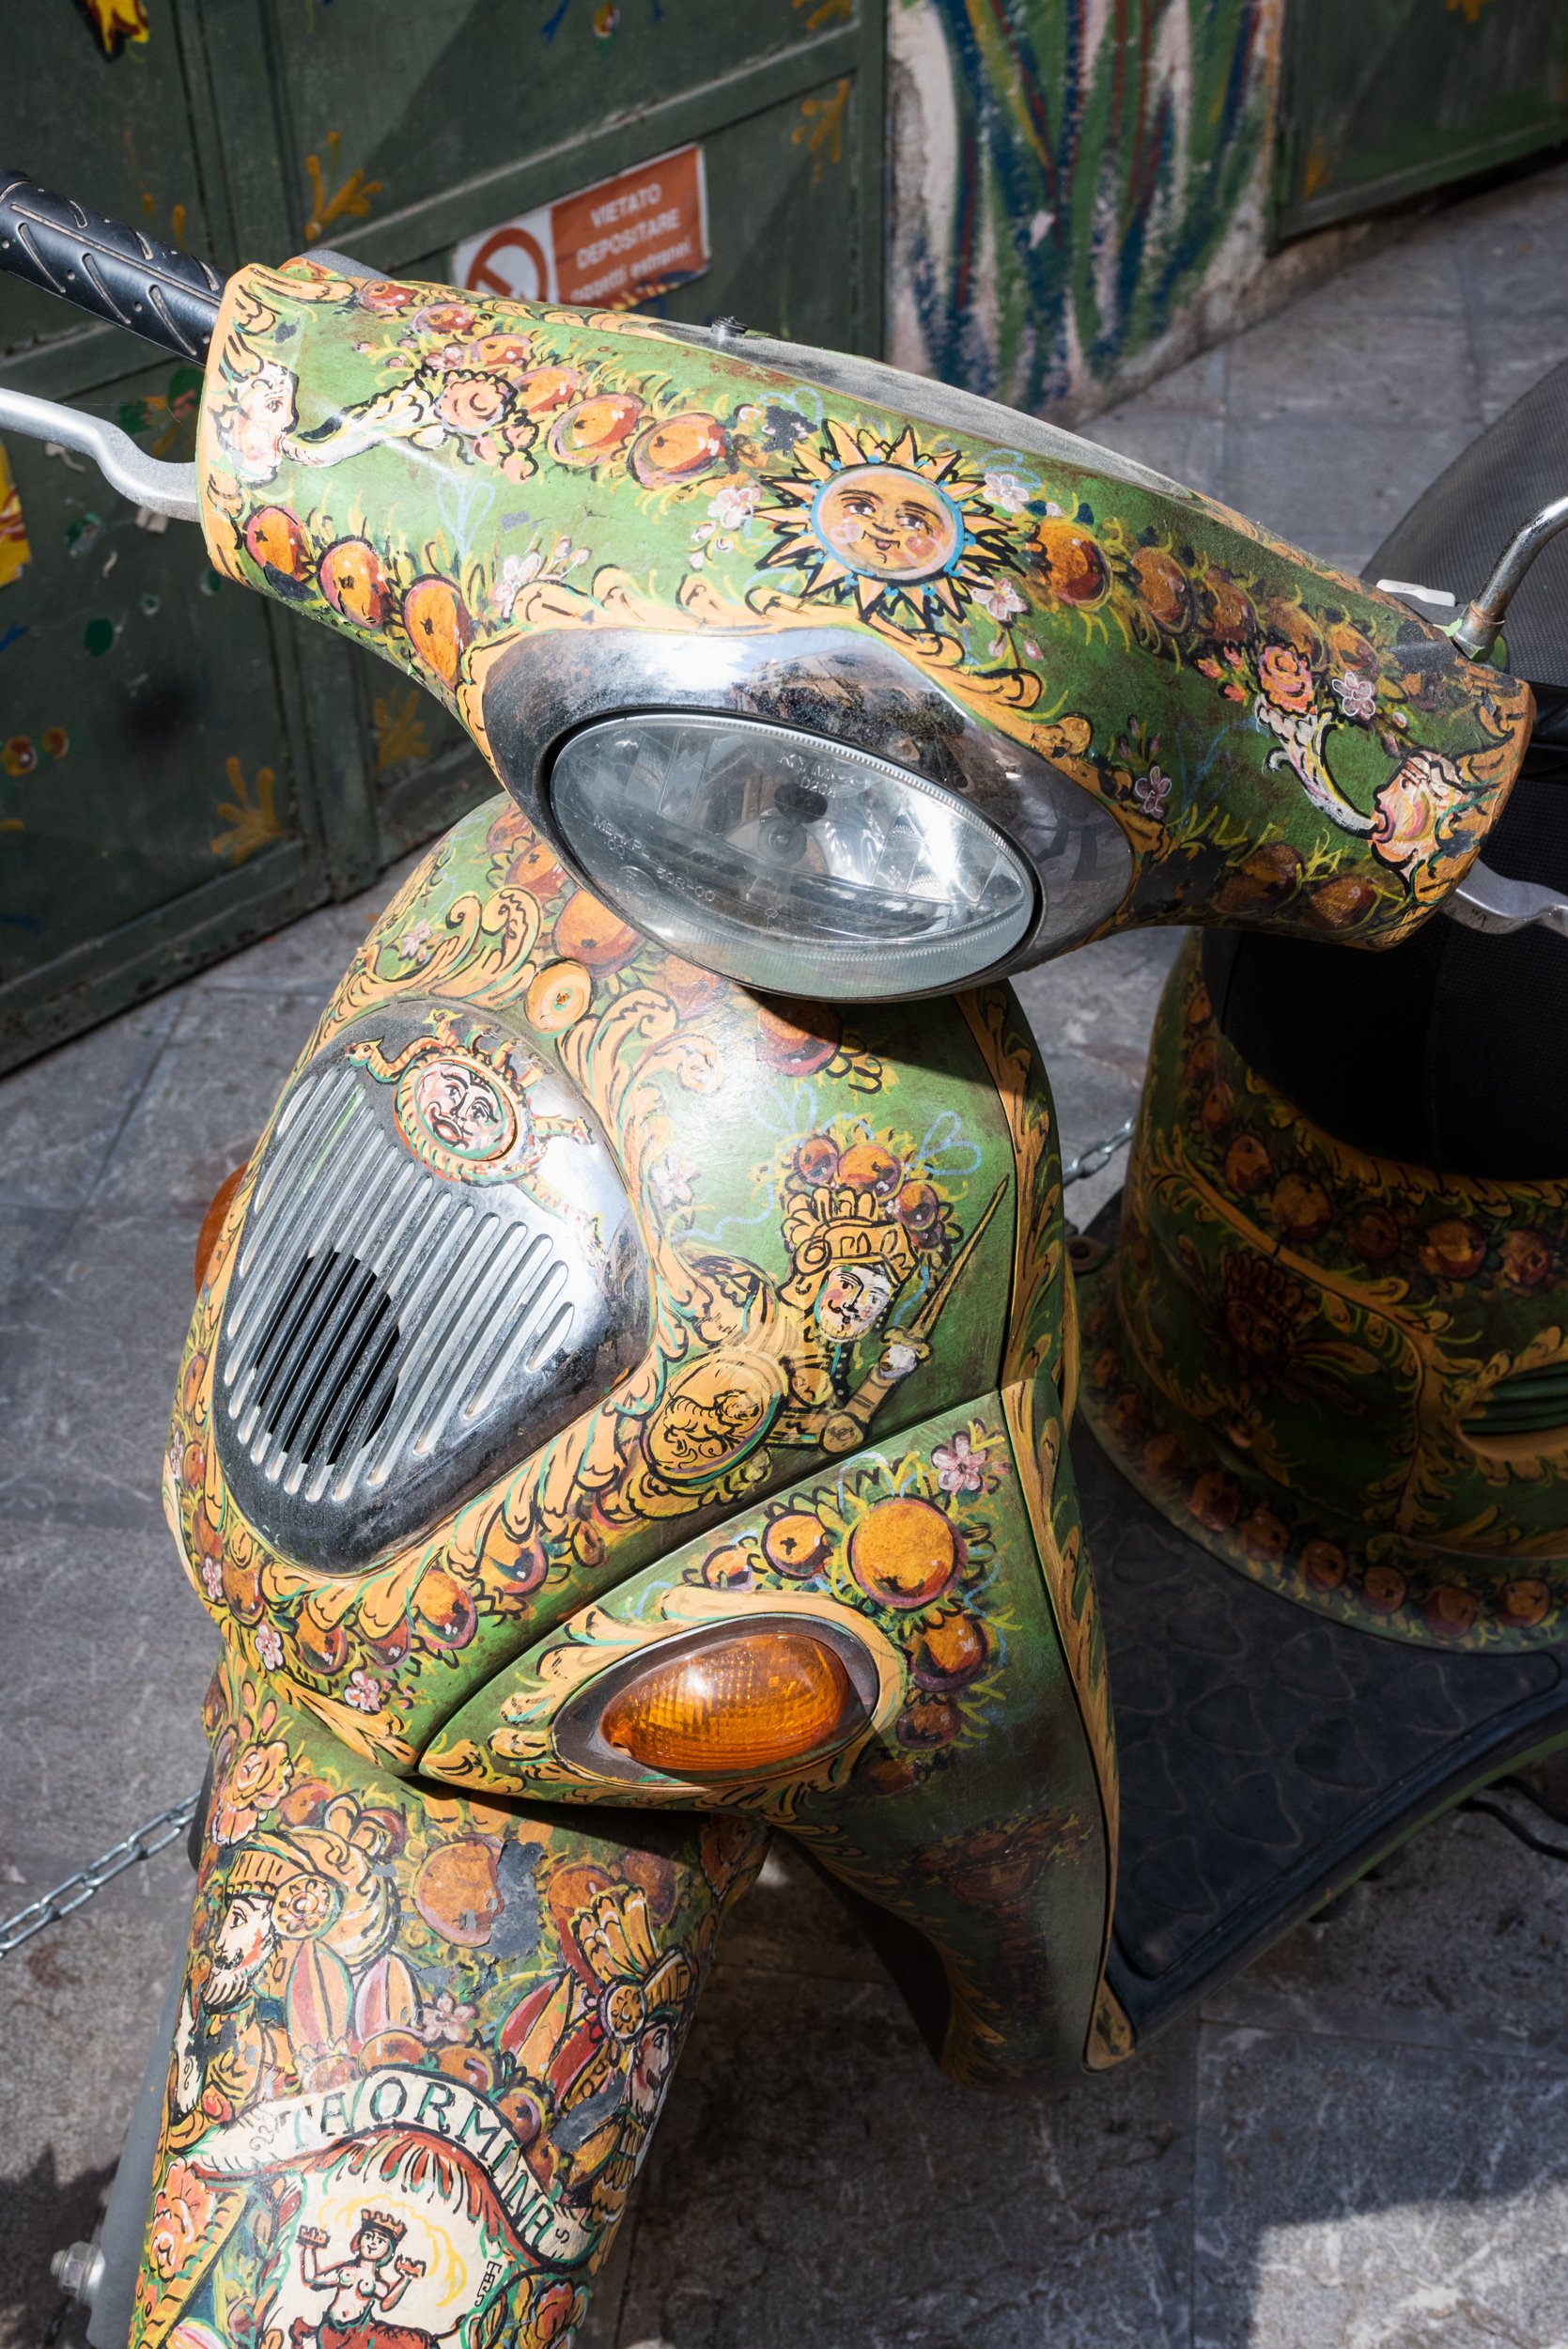 Painted scooter in Taormina